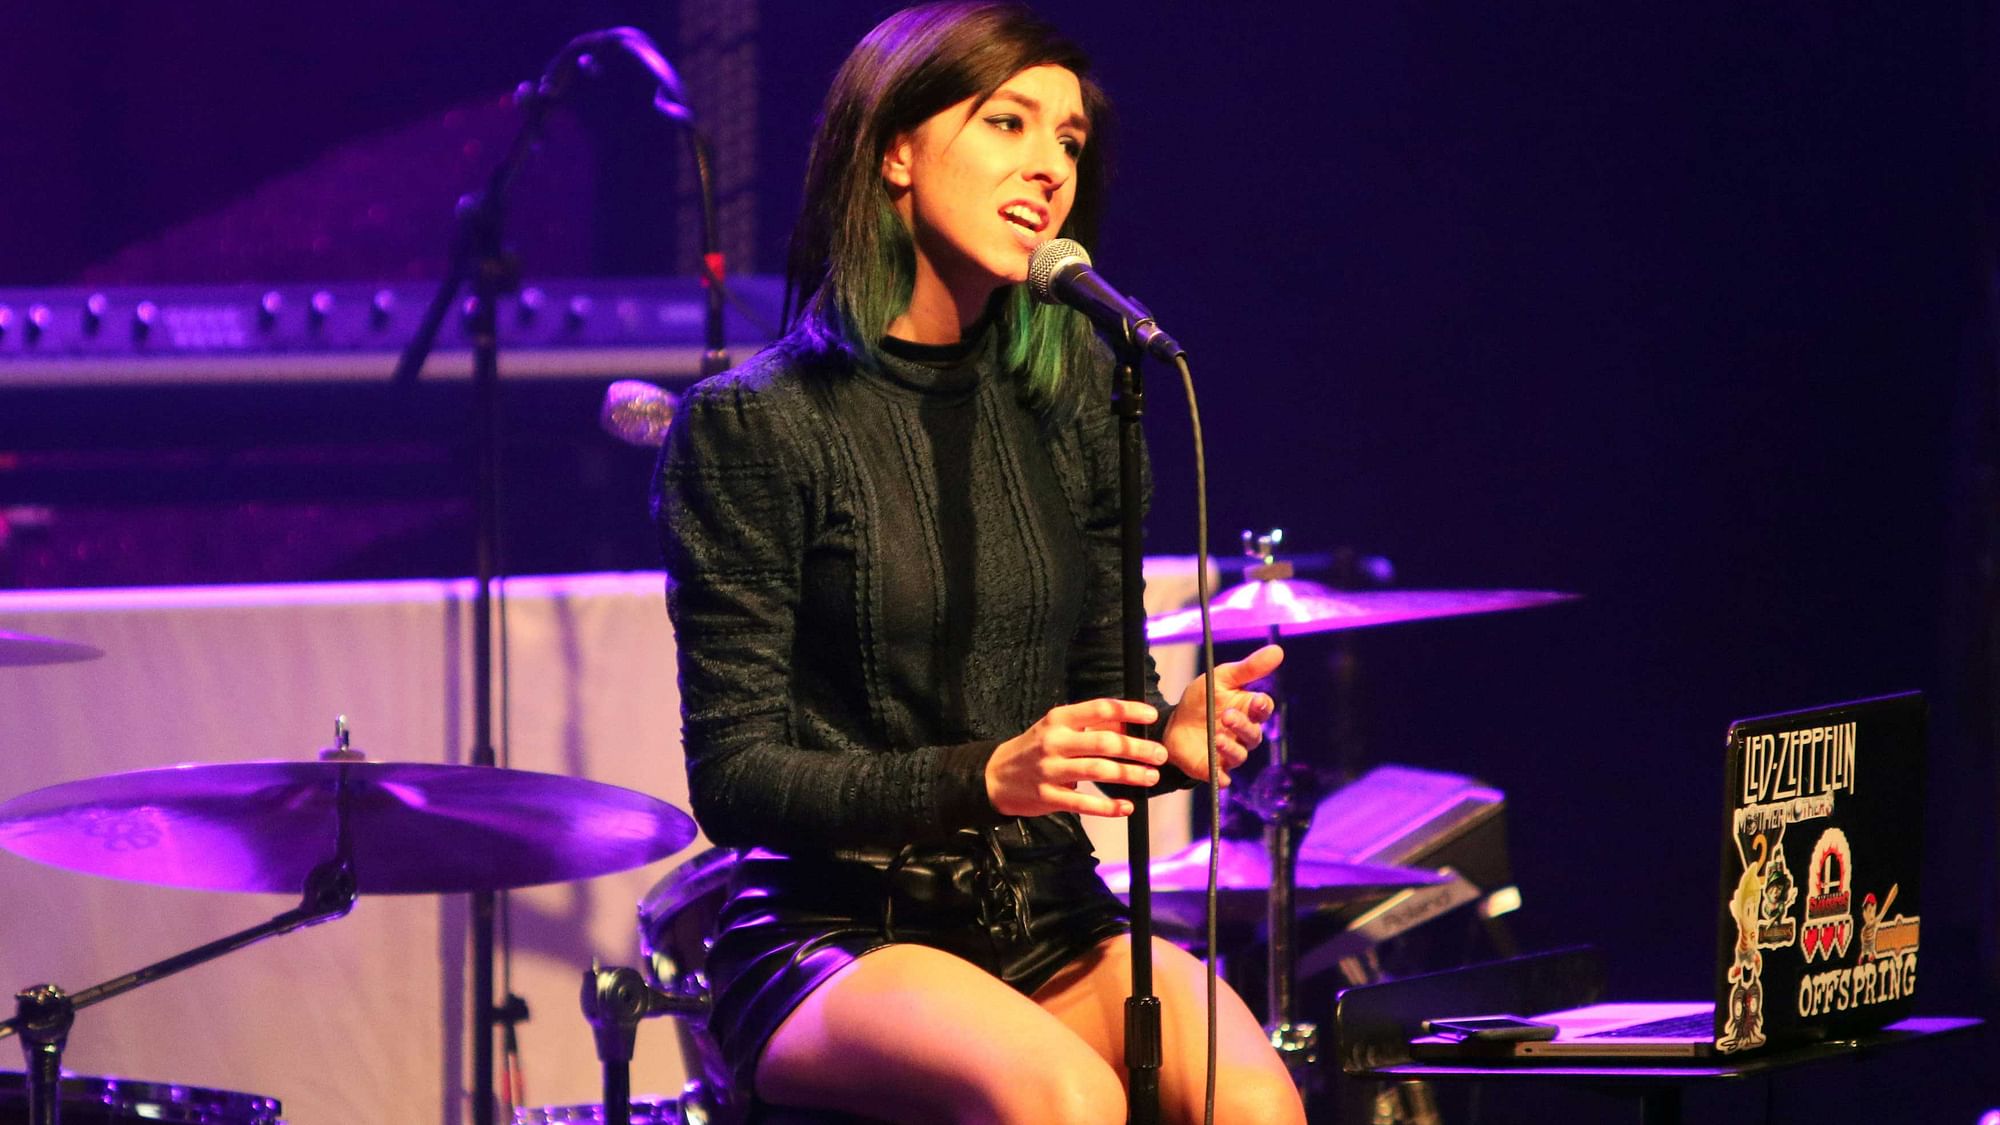 Christina Grimmie performing at a concert. (Photo: AP)